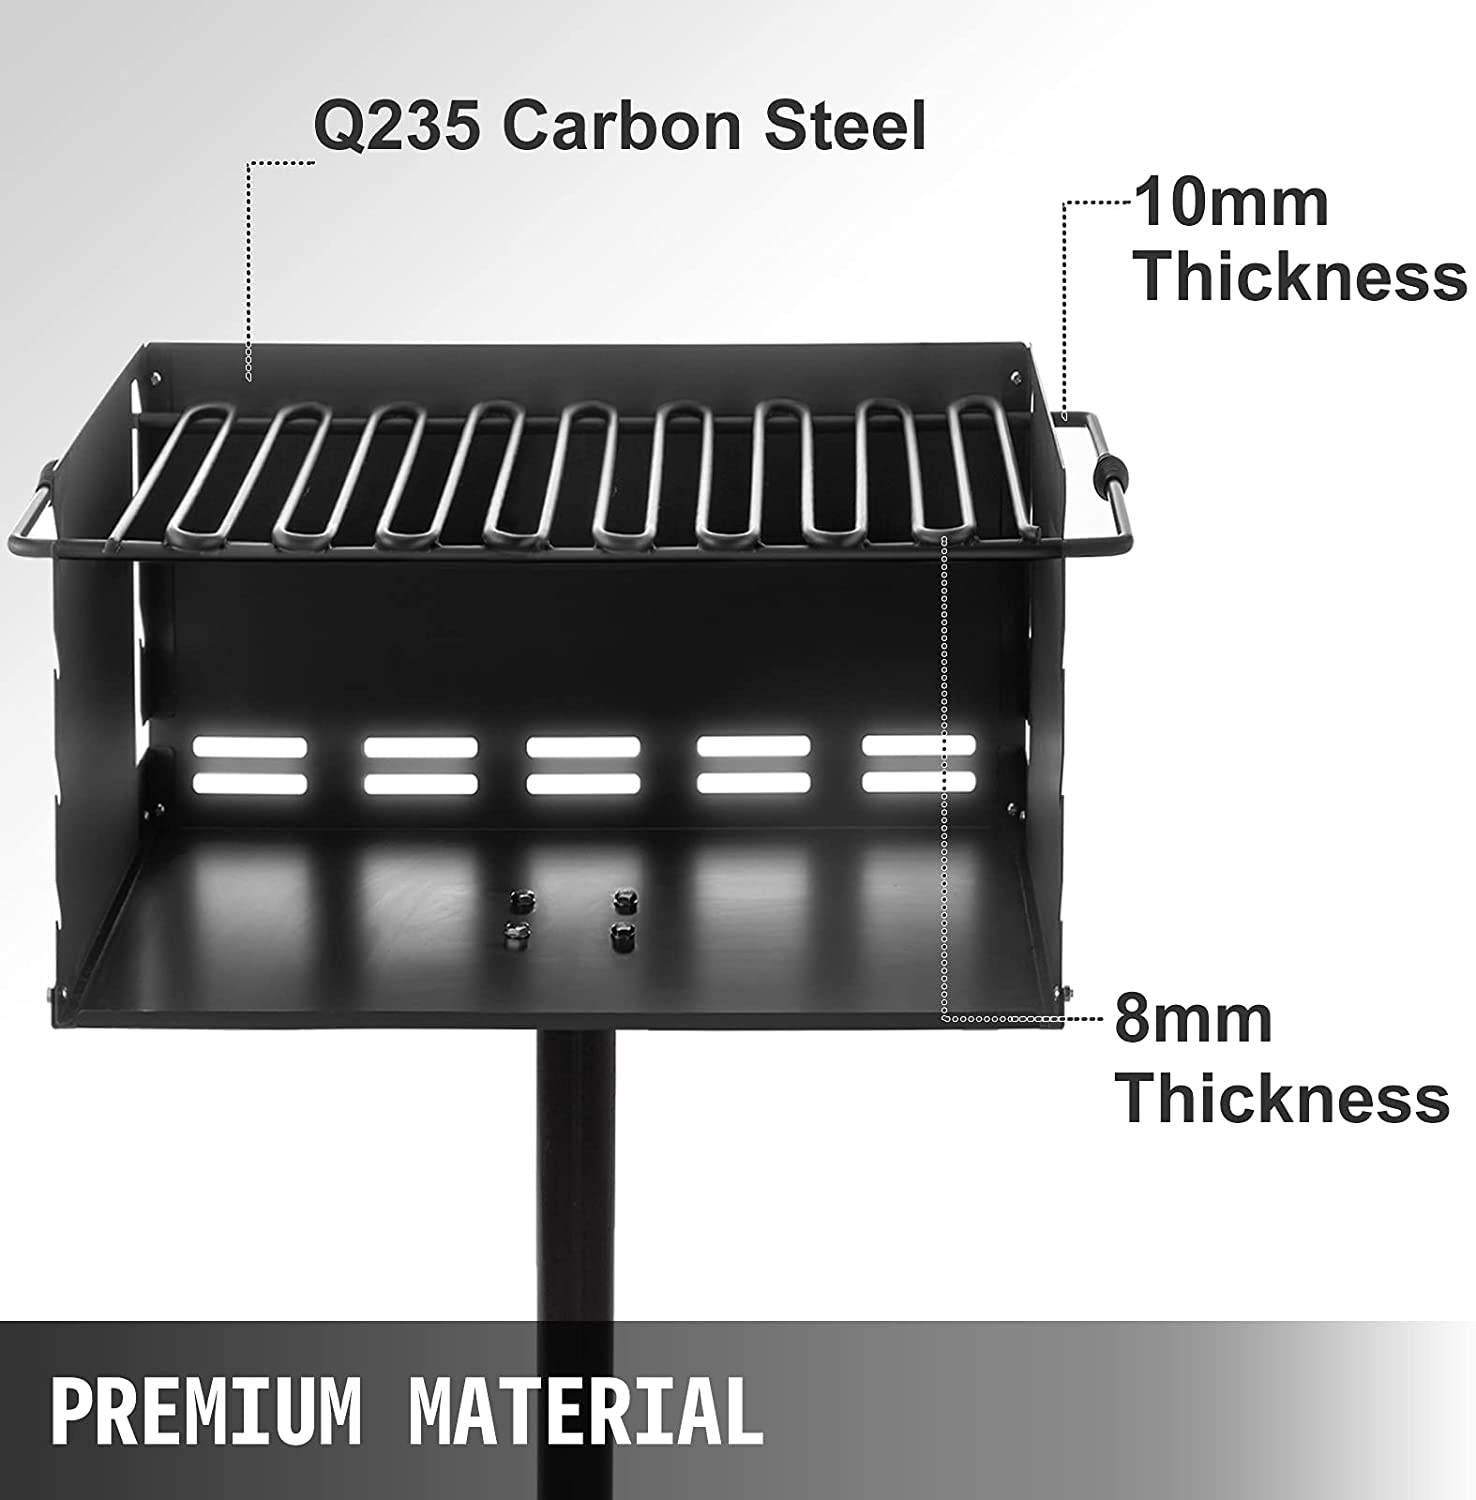 VEVOR Outdoor Park Style Grill 20x14 inch with Base Plate Park Style Charcoal Grill Carbon Steel Park Style BBQ Grill Adjustable Park Charcoal Grill Stainless Steel Grate Outdoor Park Grill - image 3 of 9